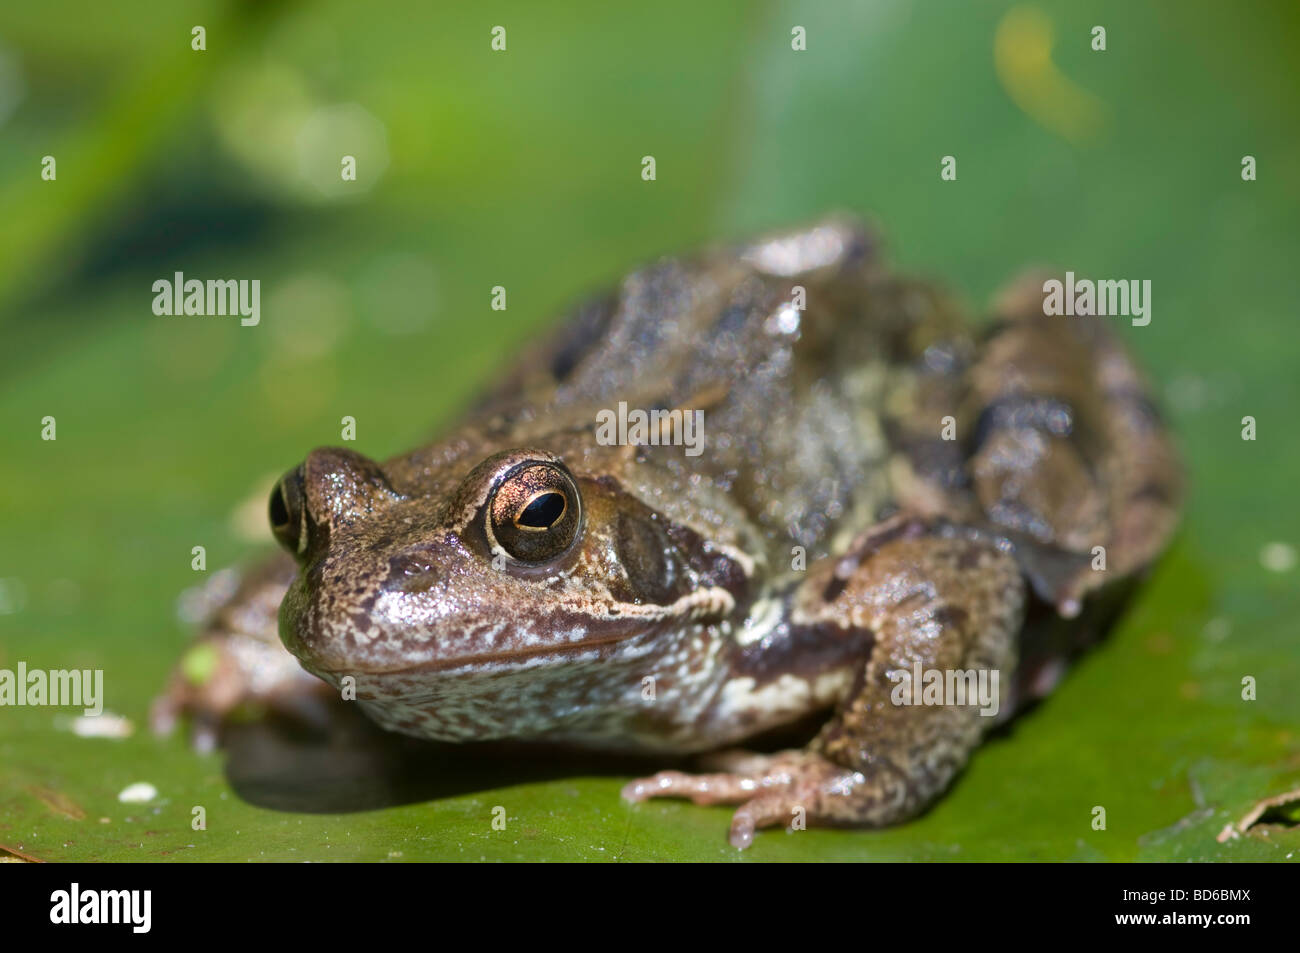 Frog on lily pad Stock Photo